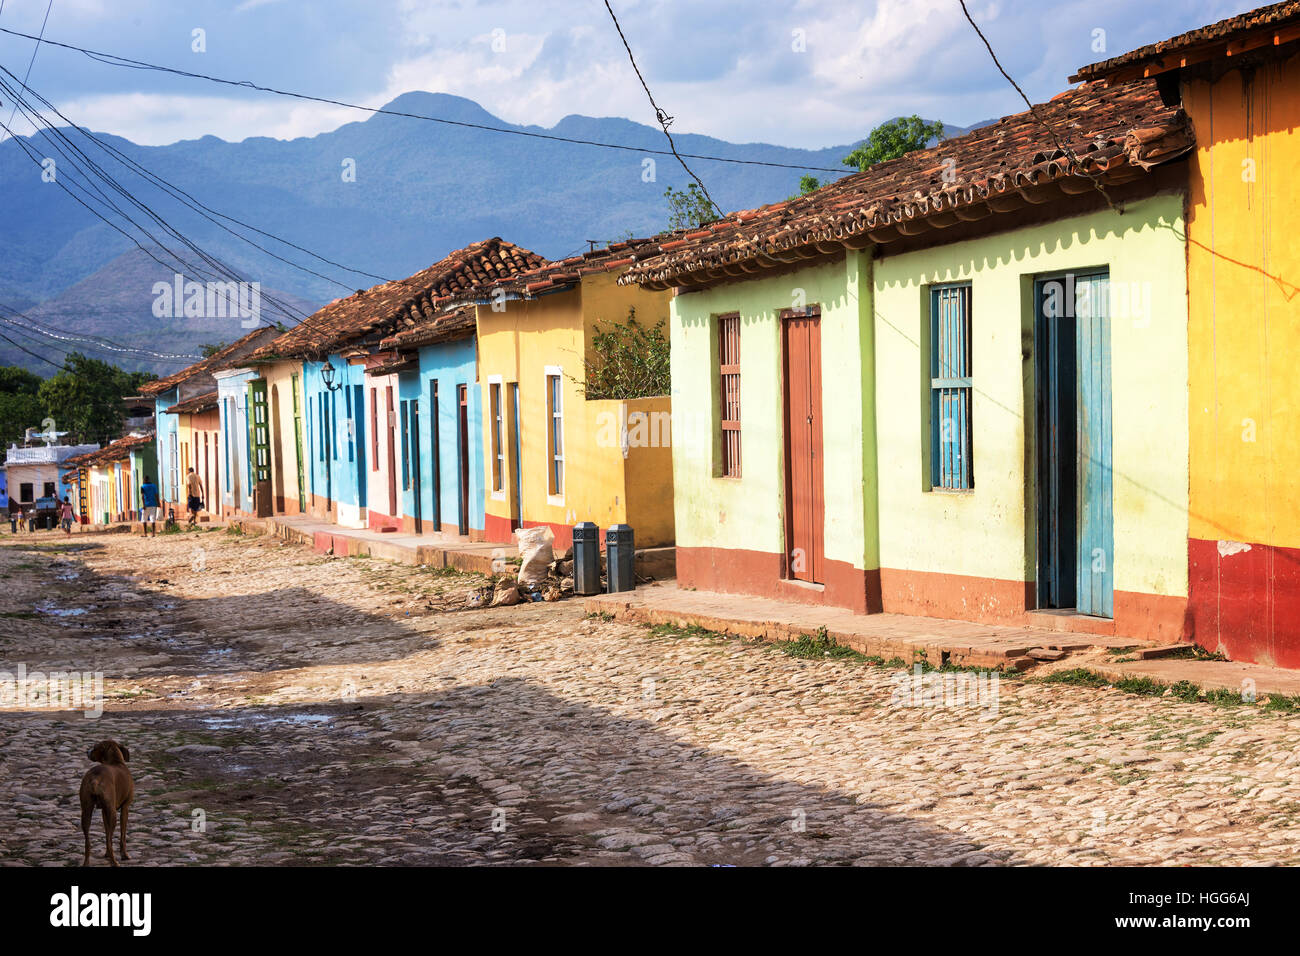 Colorful houses in a paved street of Trinidad, Cuba Stock Photo